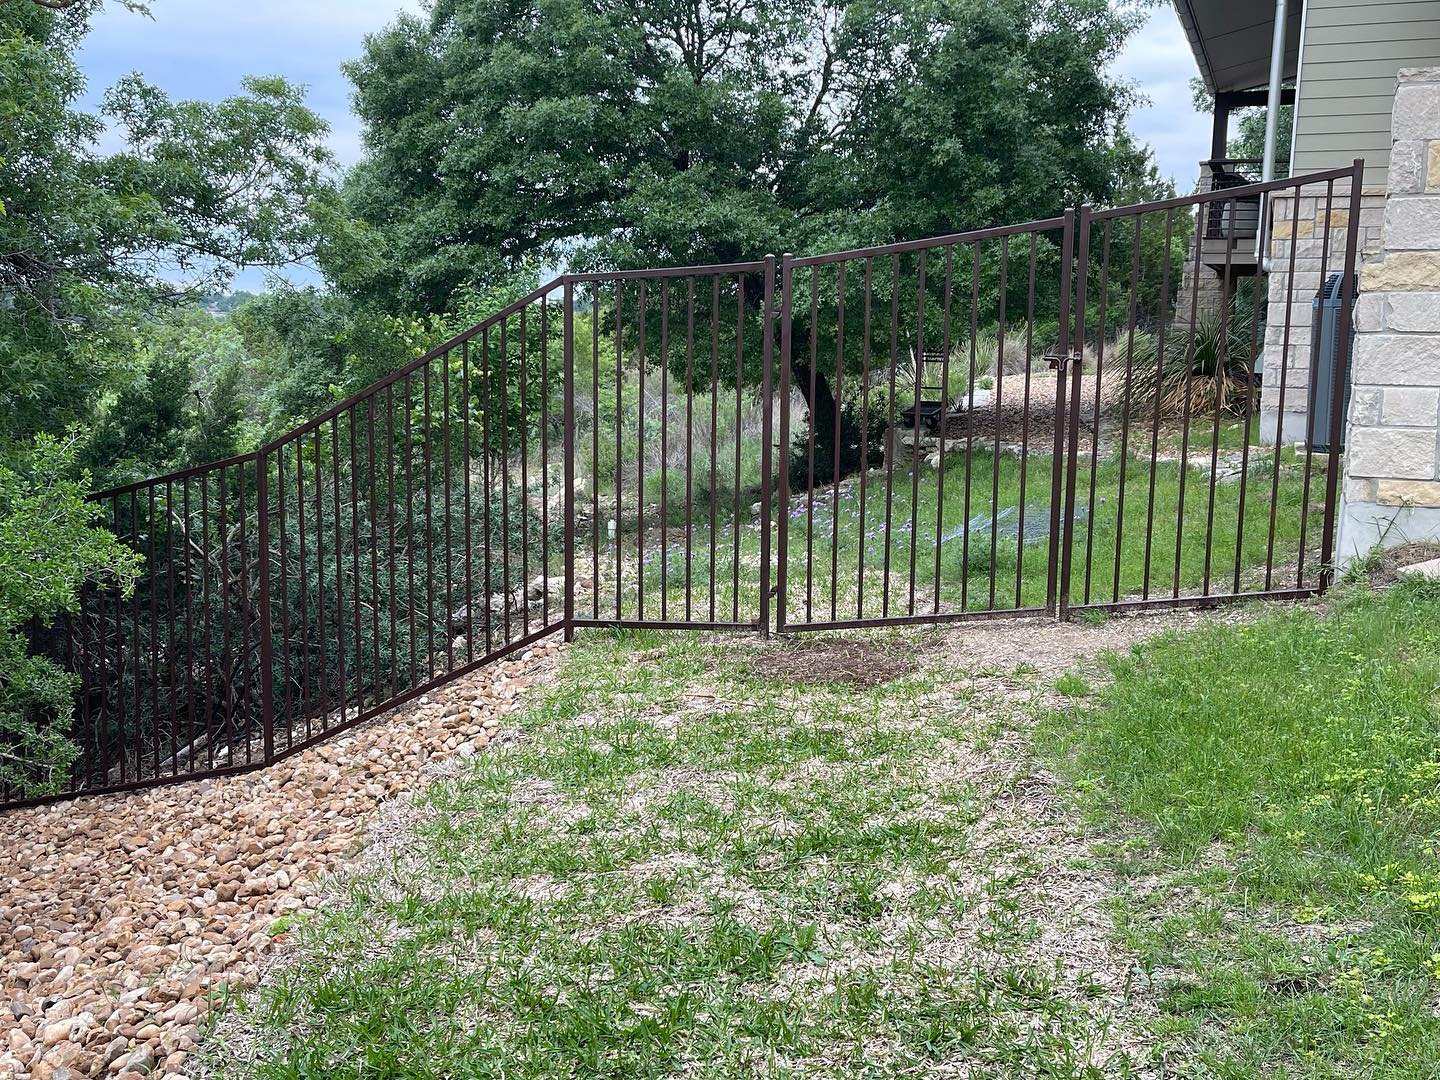 welded 1 1/2 inch top and bottom rail fence with 3/4 inch pickets.